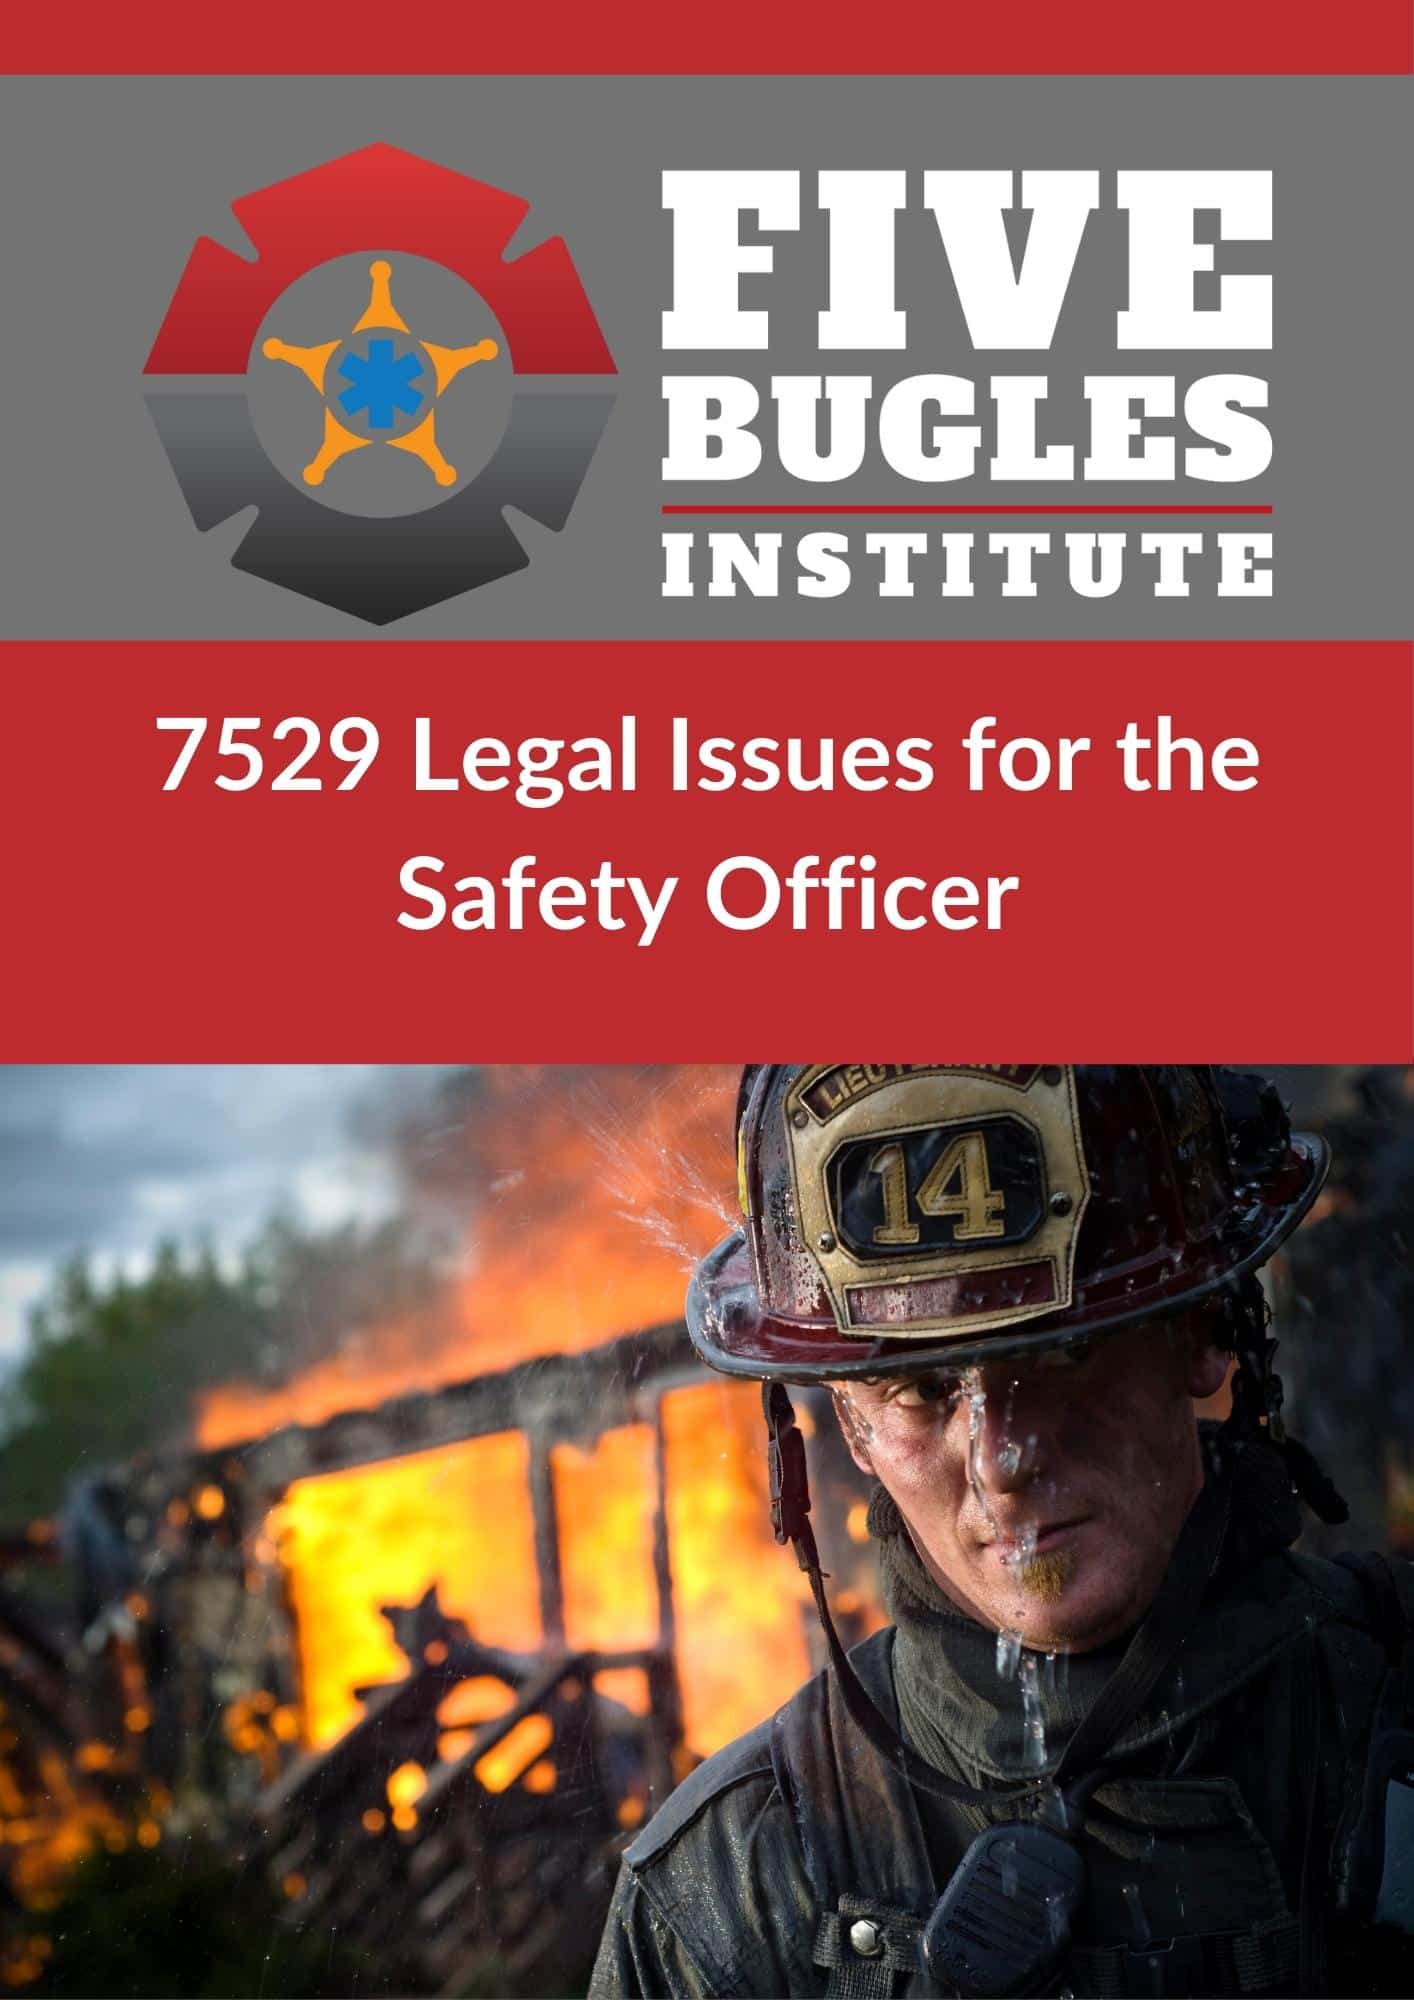 Copy of 7529 Legal Issues for the Safety Officer